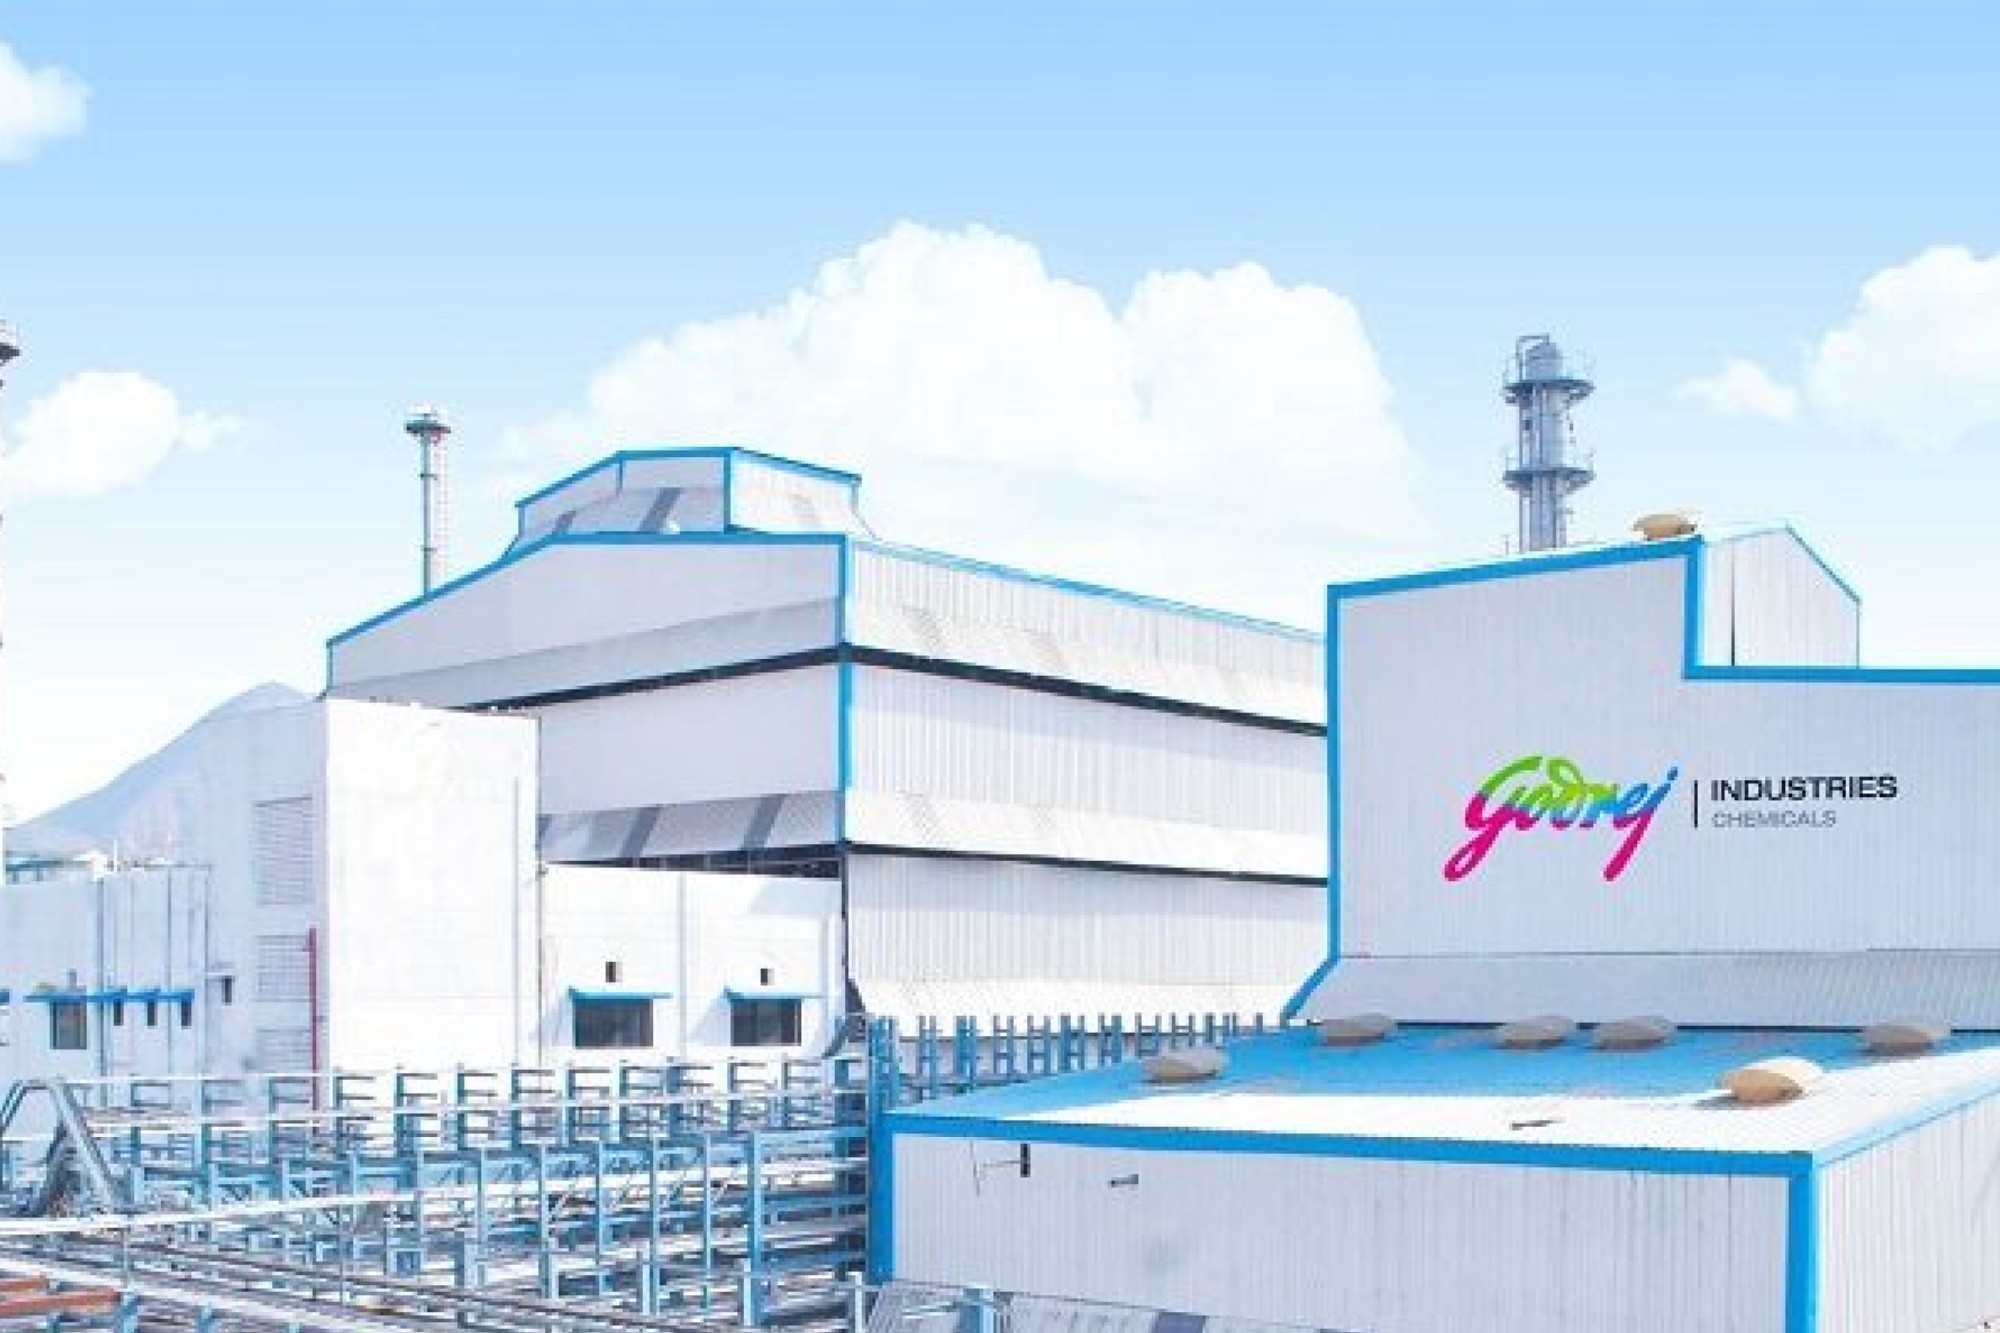 Godrej Industries’ Chemicals Business signs agreement to acquire Unit II of Shree Vallabh Chemicals (Kheda)